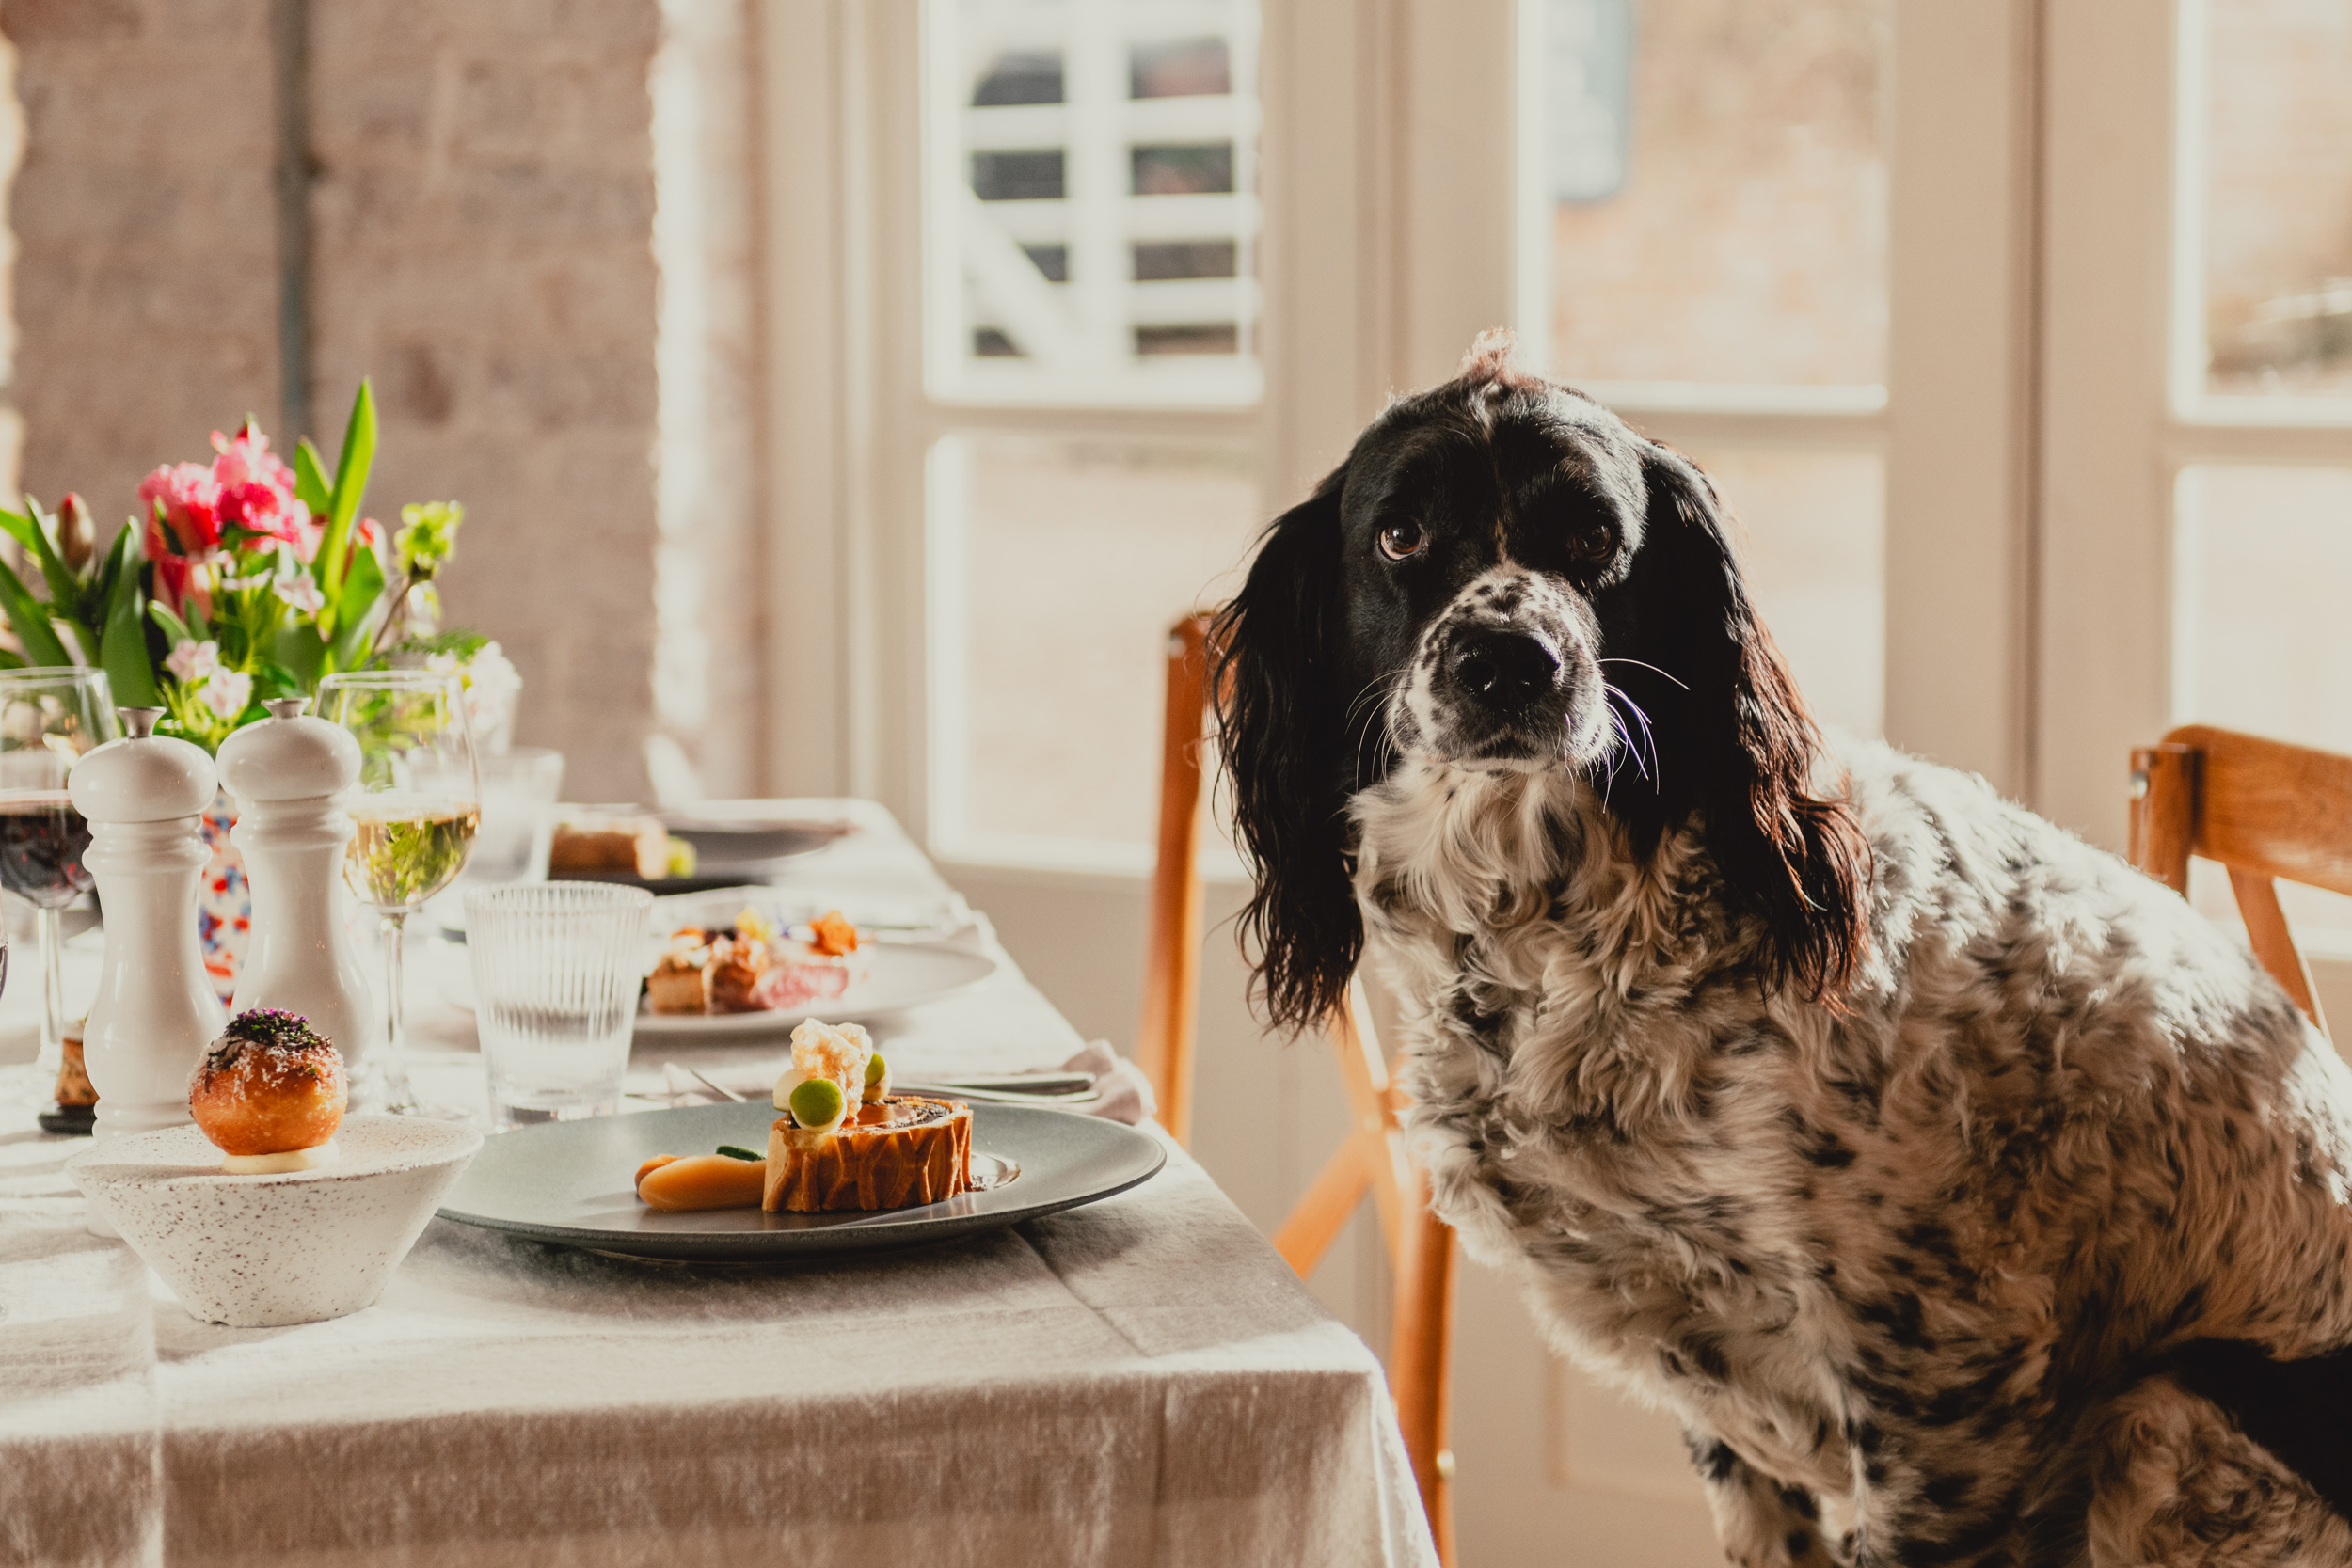 A springer spaniel sits on a chair looking longingly at a plate of food containing a roast dinner